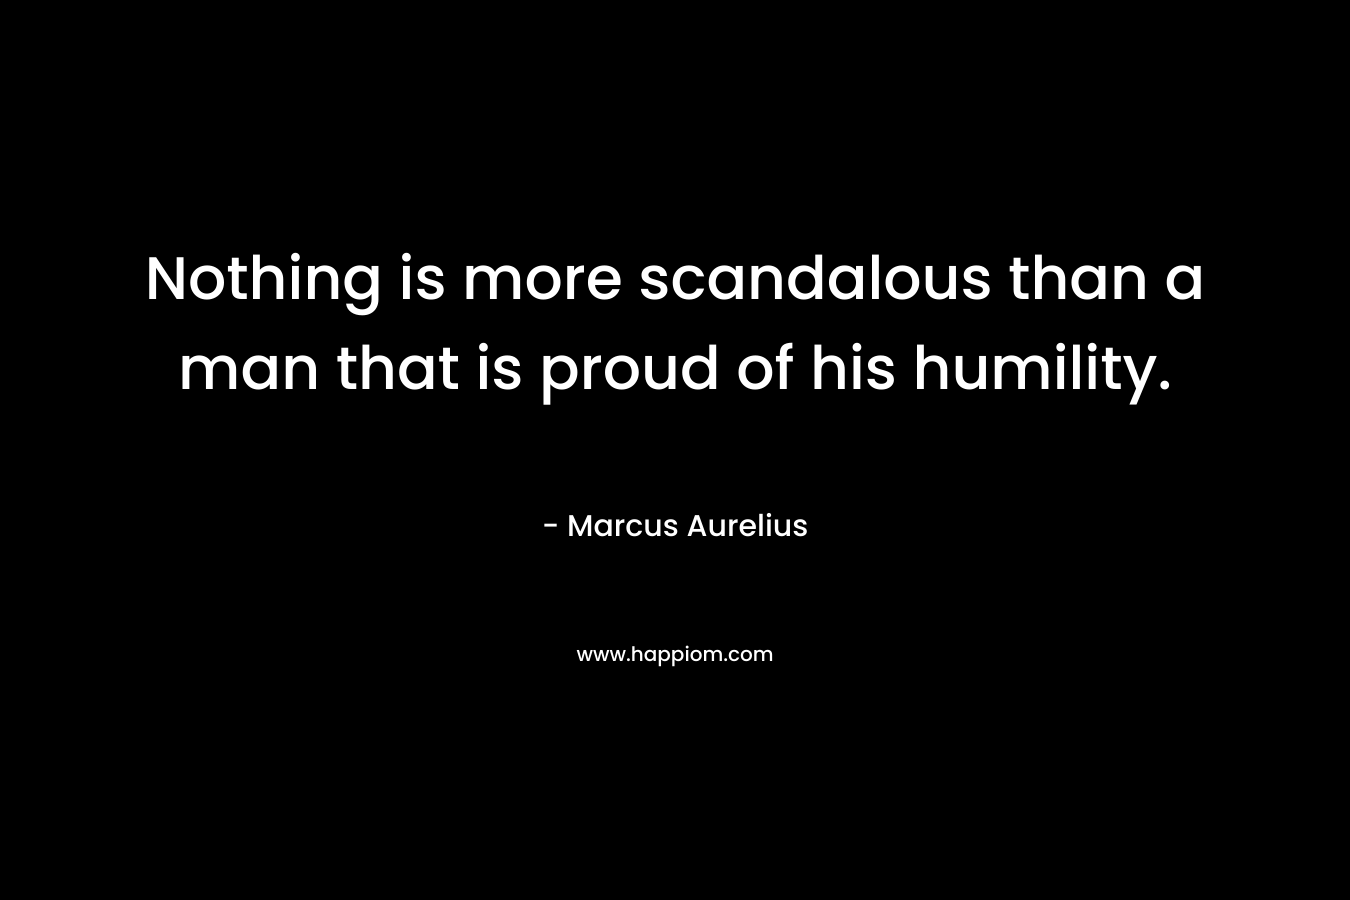 Nothing is more scandalous than a man that is proud of his humility.